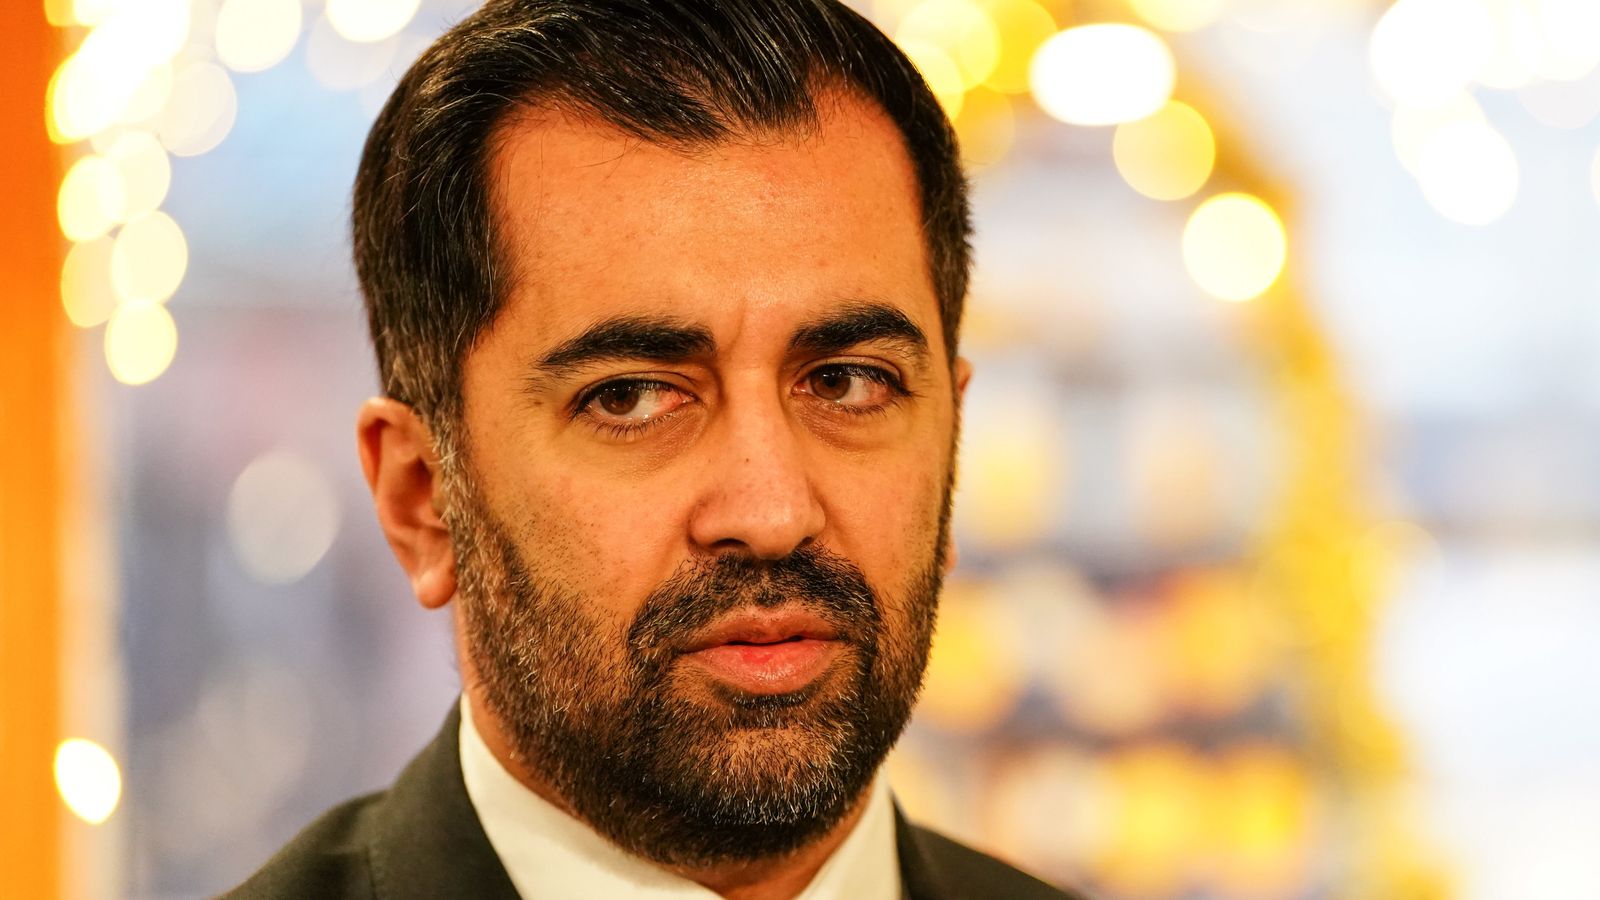 Humza Yousaf mocked over claim world leaders 'lining up' for advice from Scottish government